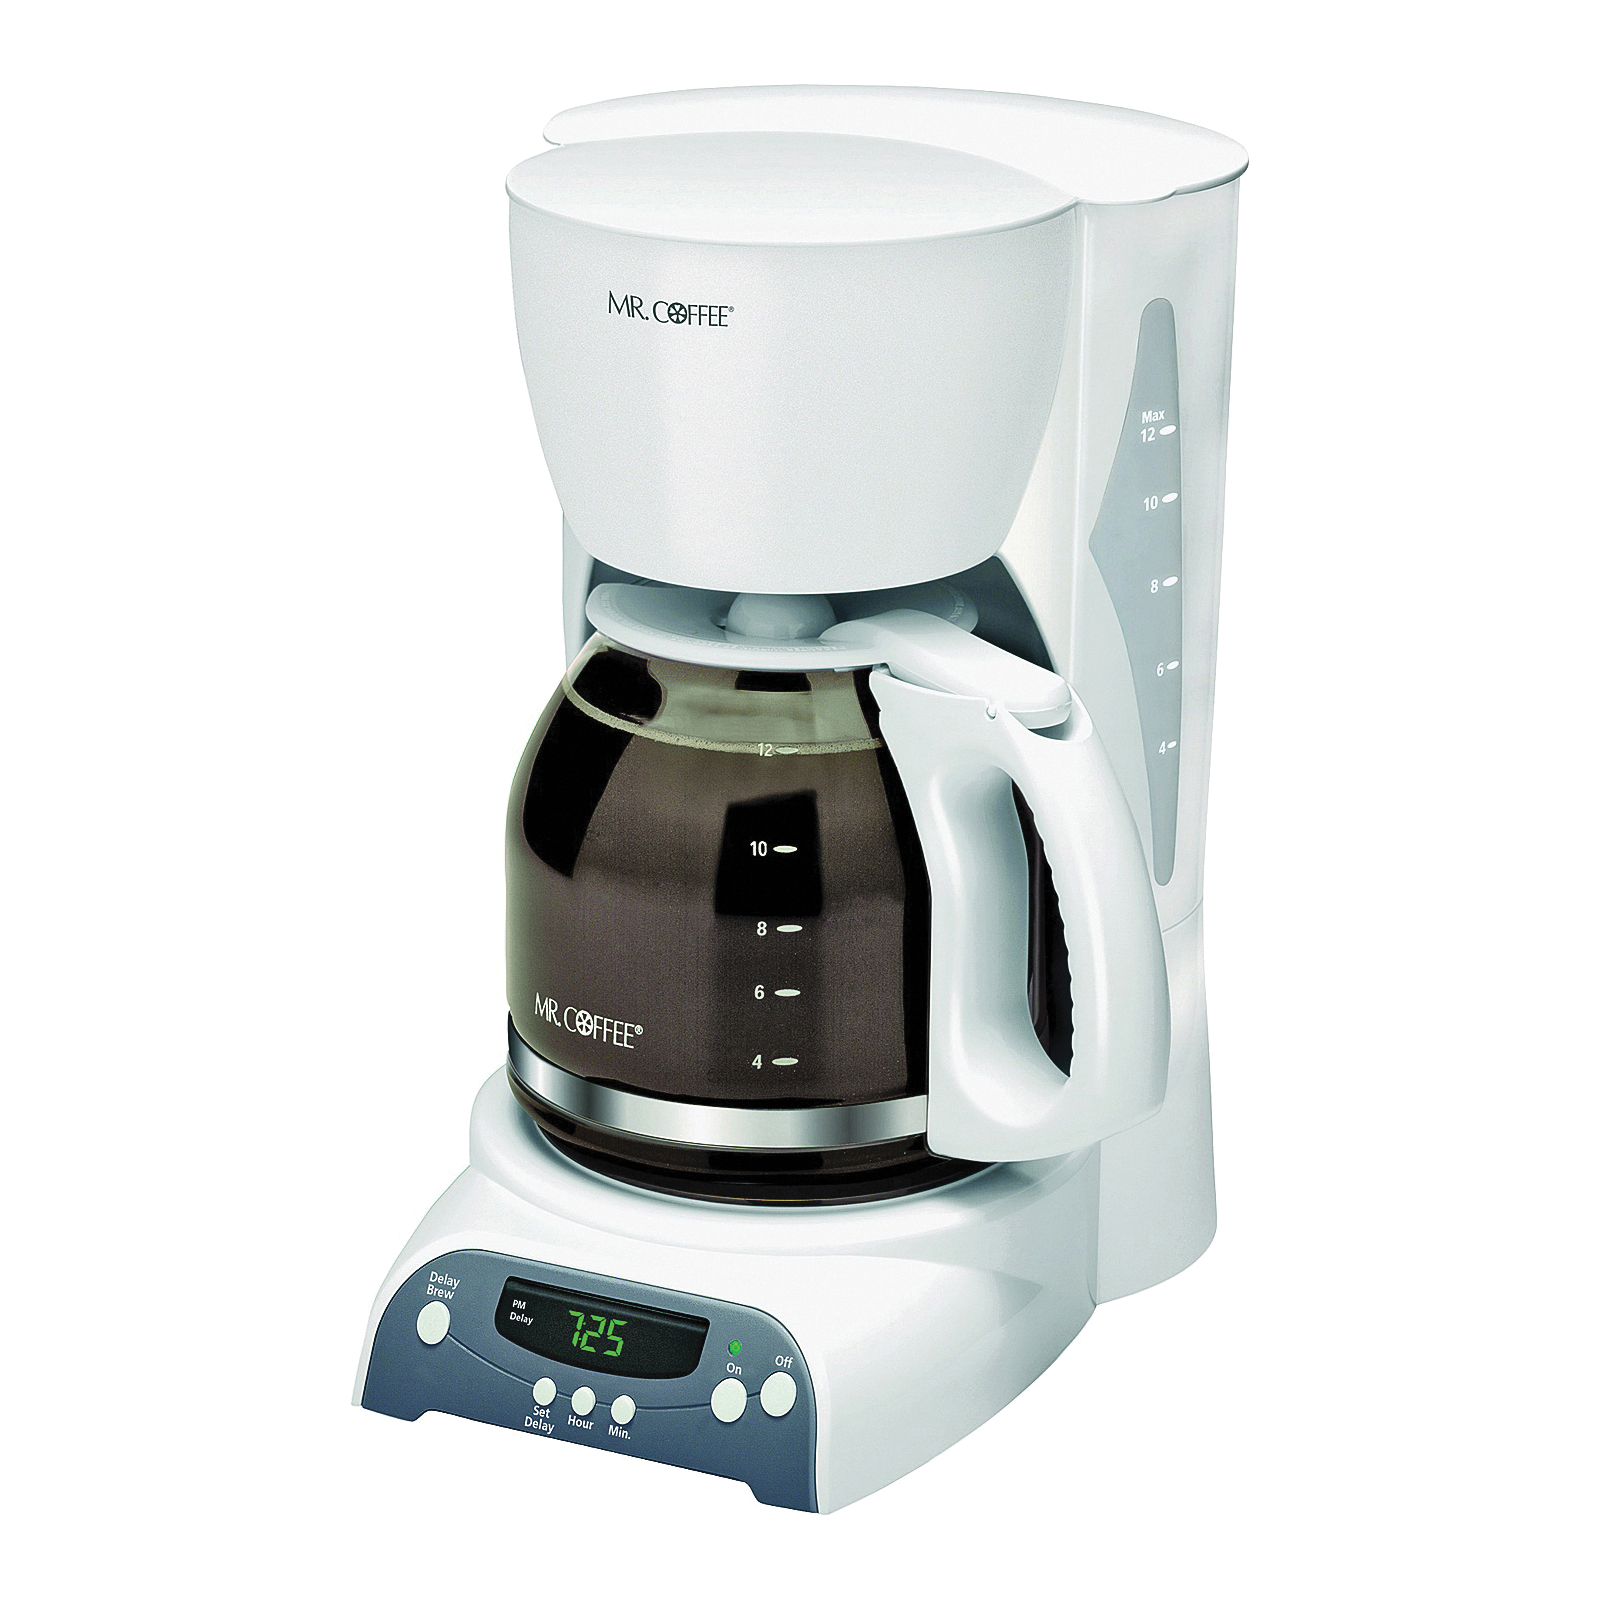 SKX20-RB Coffee Maker, 12 Cups Capacity, 900 W, White